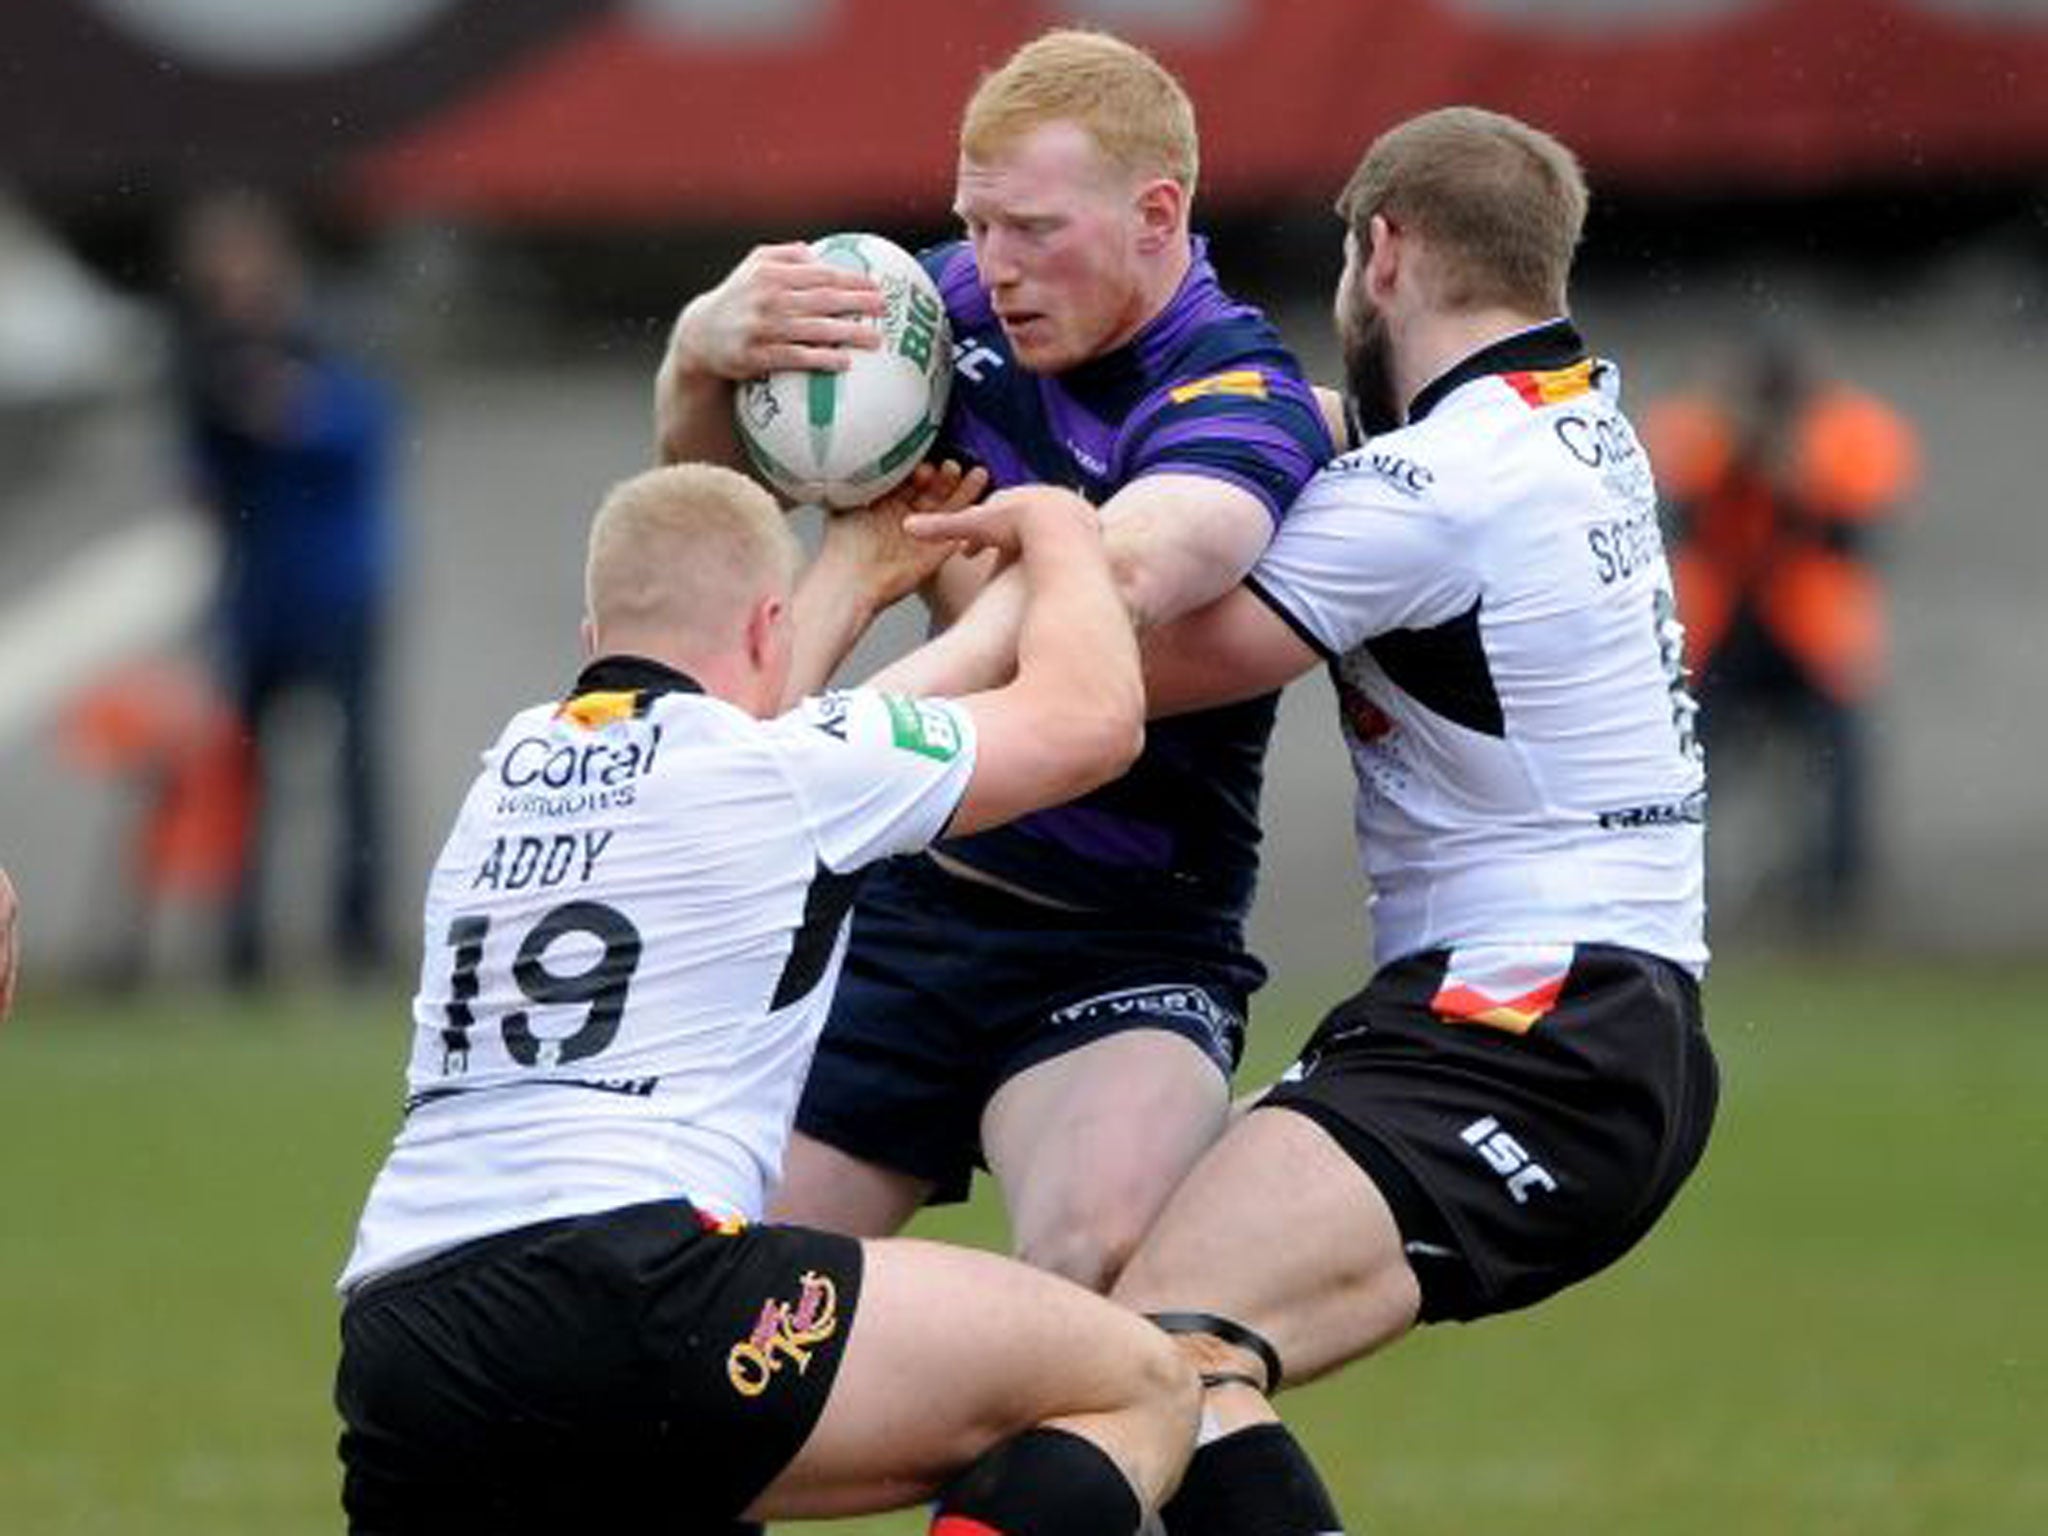 Wigan’s Liam Farrell is held up by Danny Addy and Nick Scruton